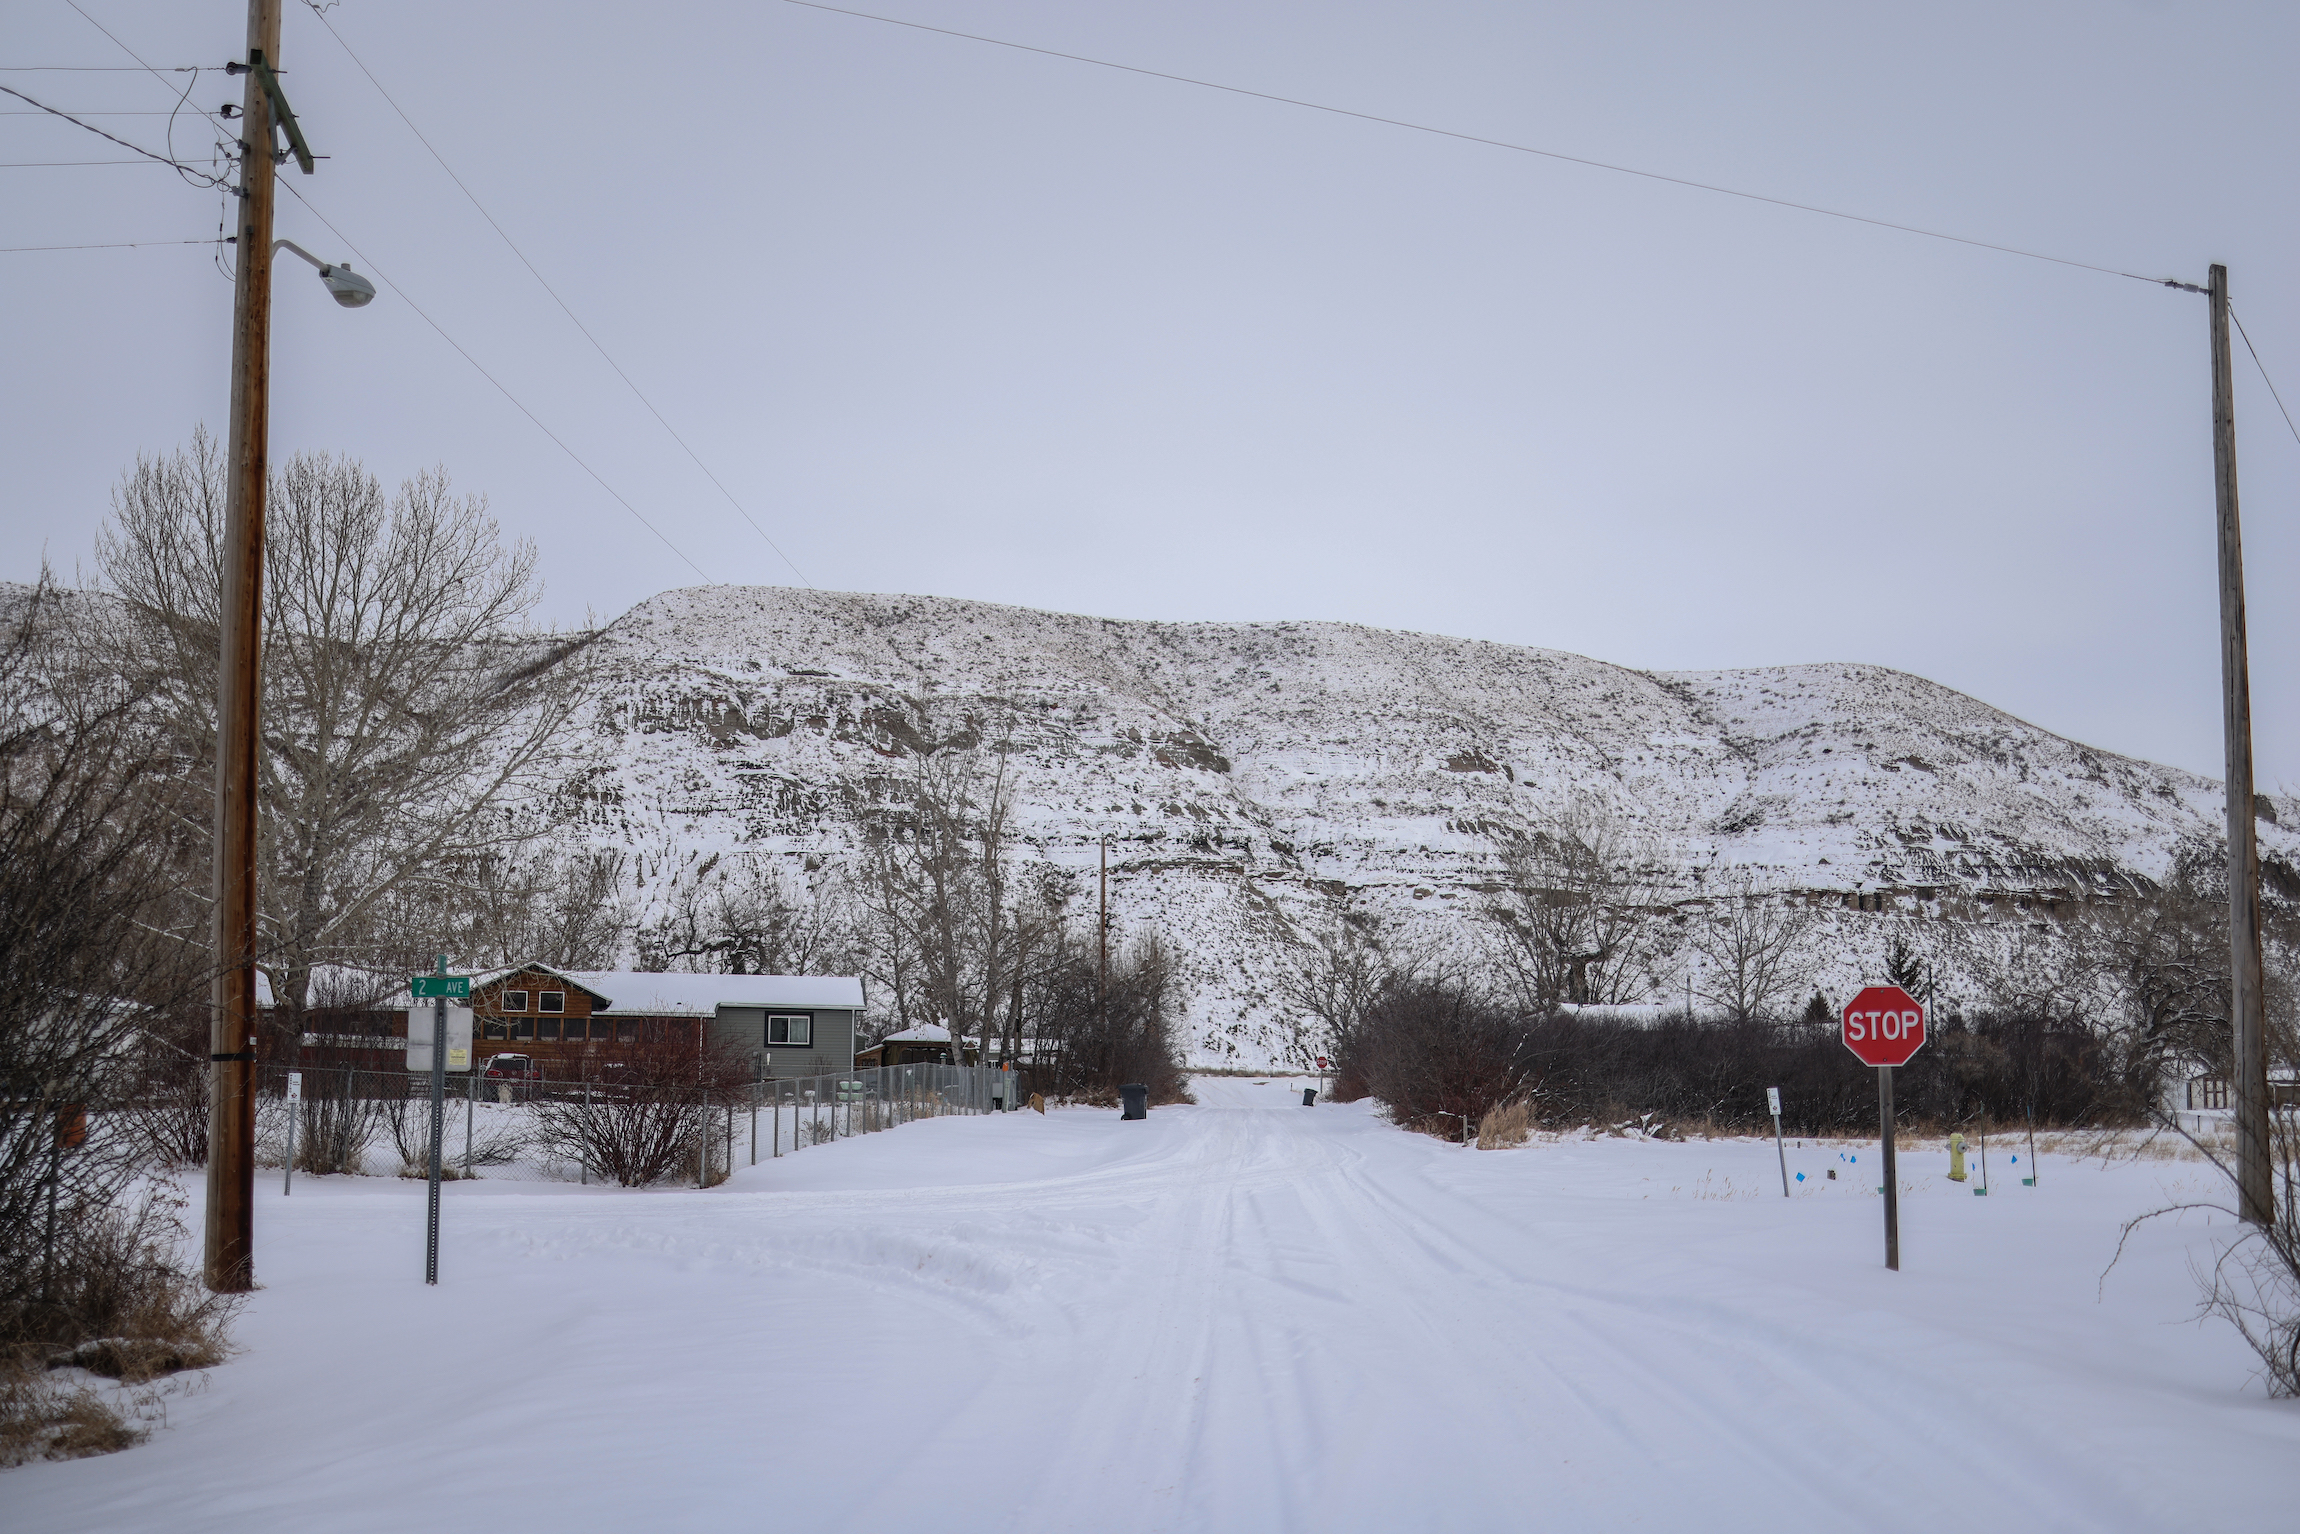 A sparsely populated community at the base of a snow-covered valley in Southern Alberta